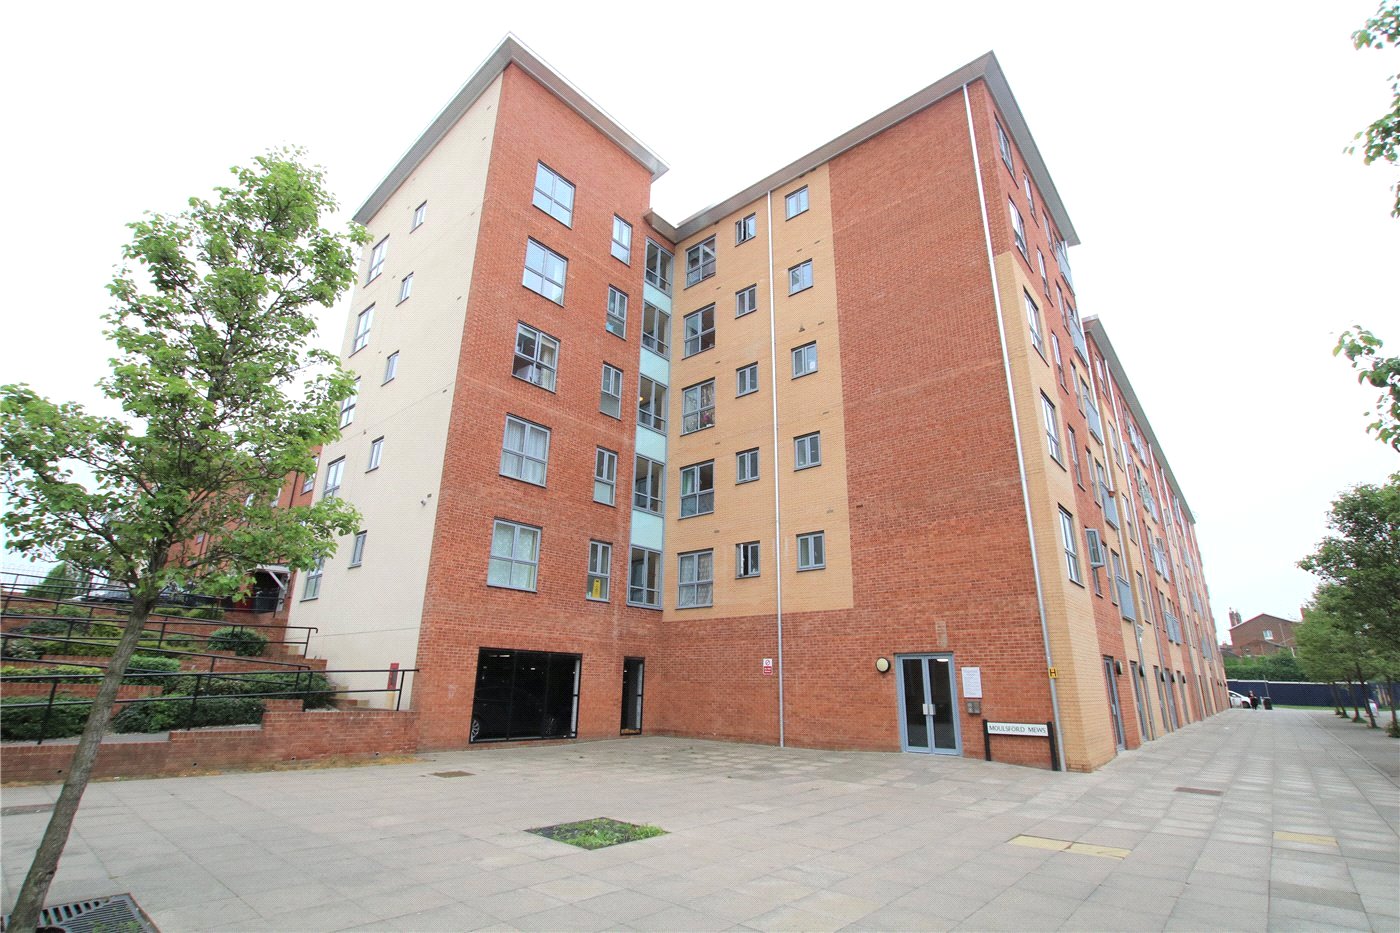 Englefield House, Moulsford Mews, Reading, Berkshire, RG30 2 bedroom flat/apartment in Moulsford Mews